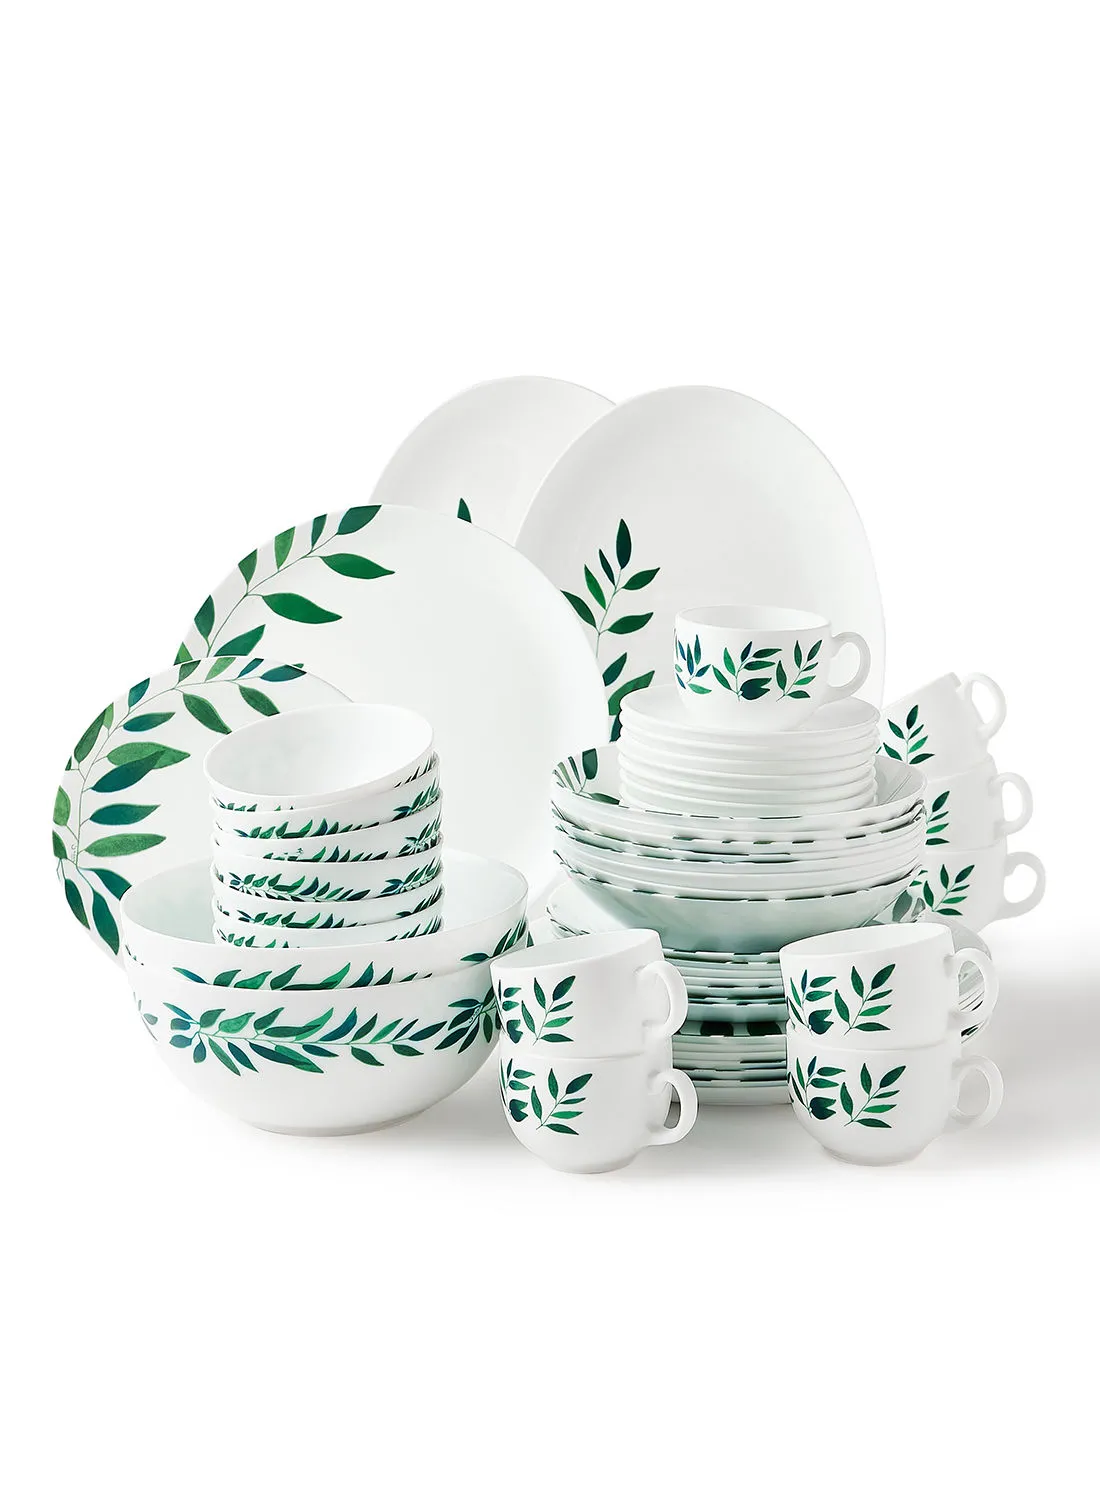 noon east 52 Piece Opalware Dinner Set For Everyday Use - Light Weight Dishes, Plates - Dinner Plate, Side Plate, Bowl, Cups, Serving Dish And Bowl - Serves 8 - Printed Design Haneen